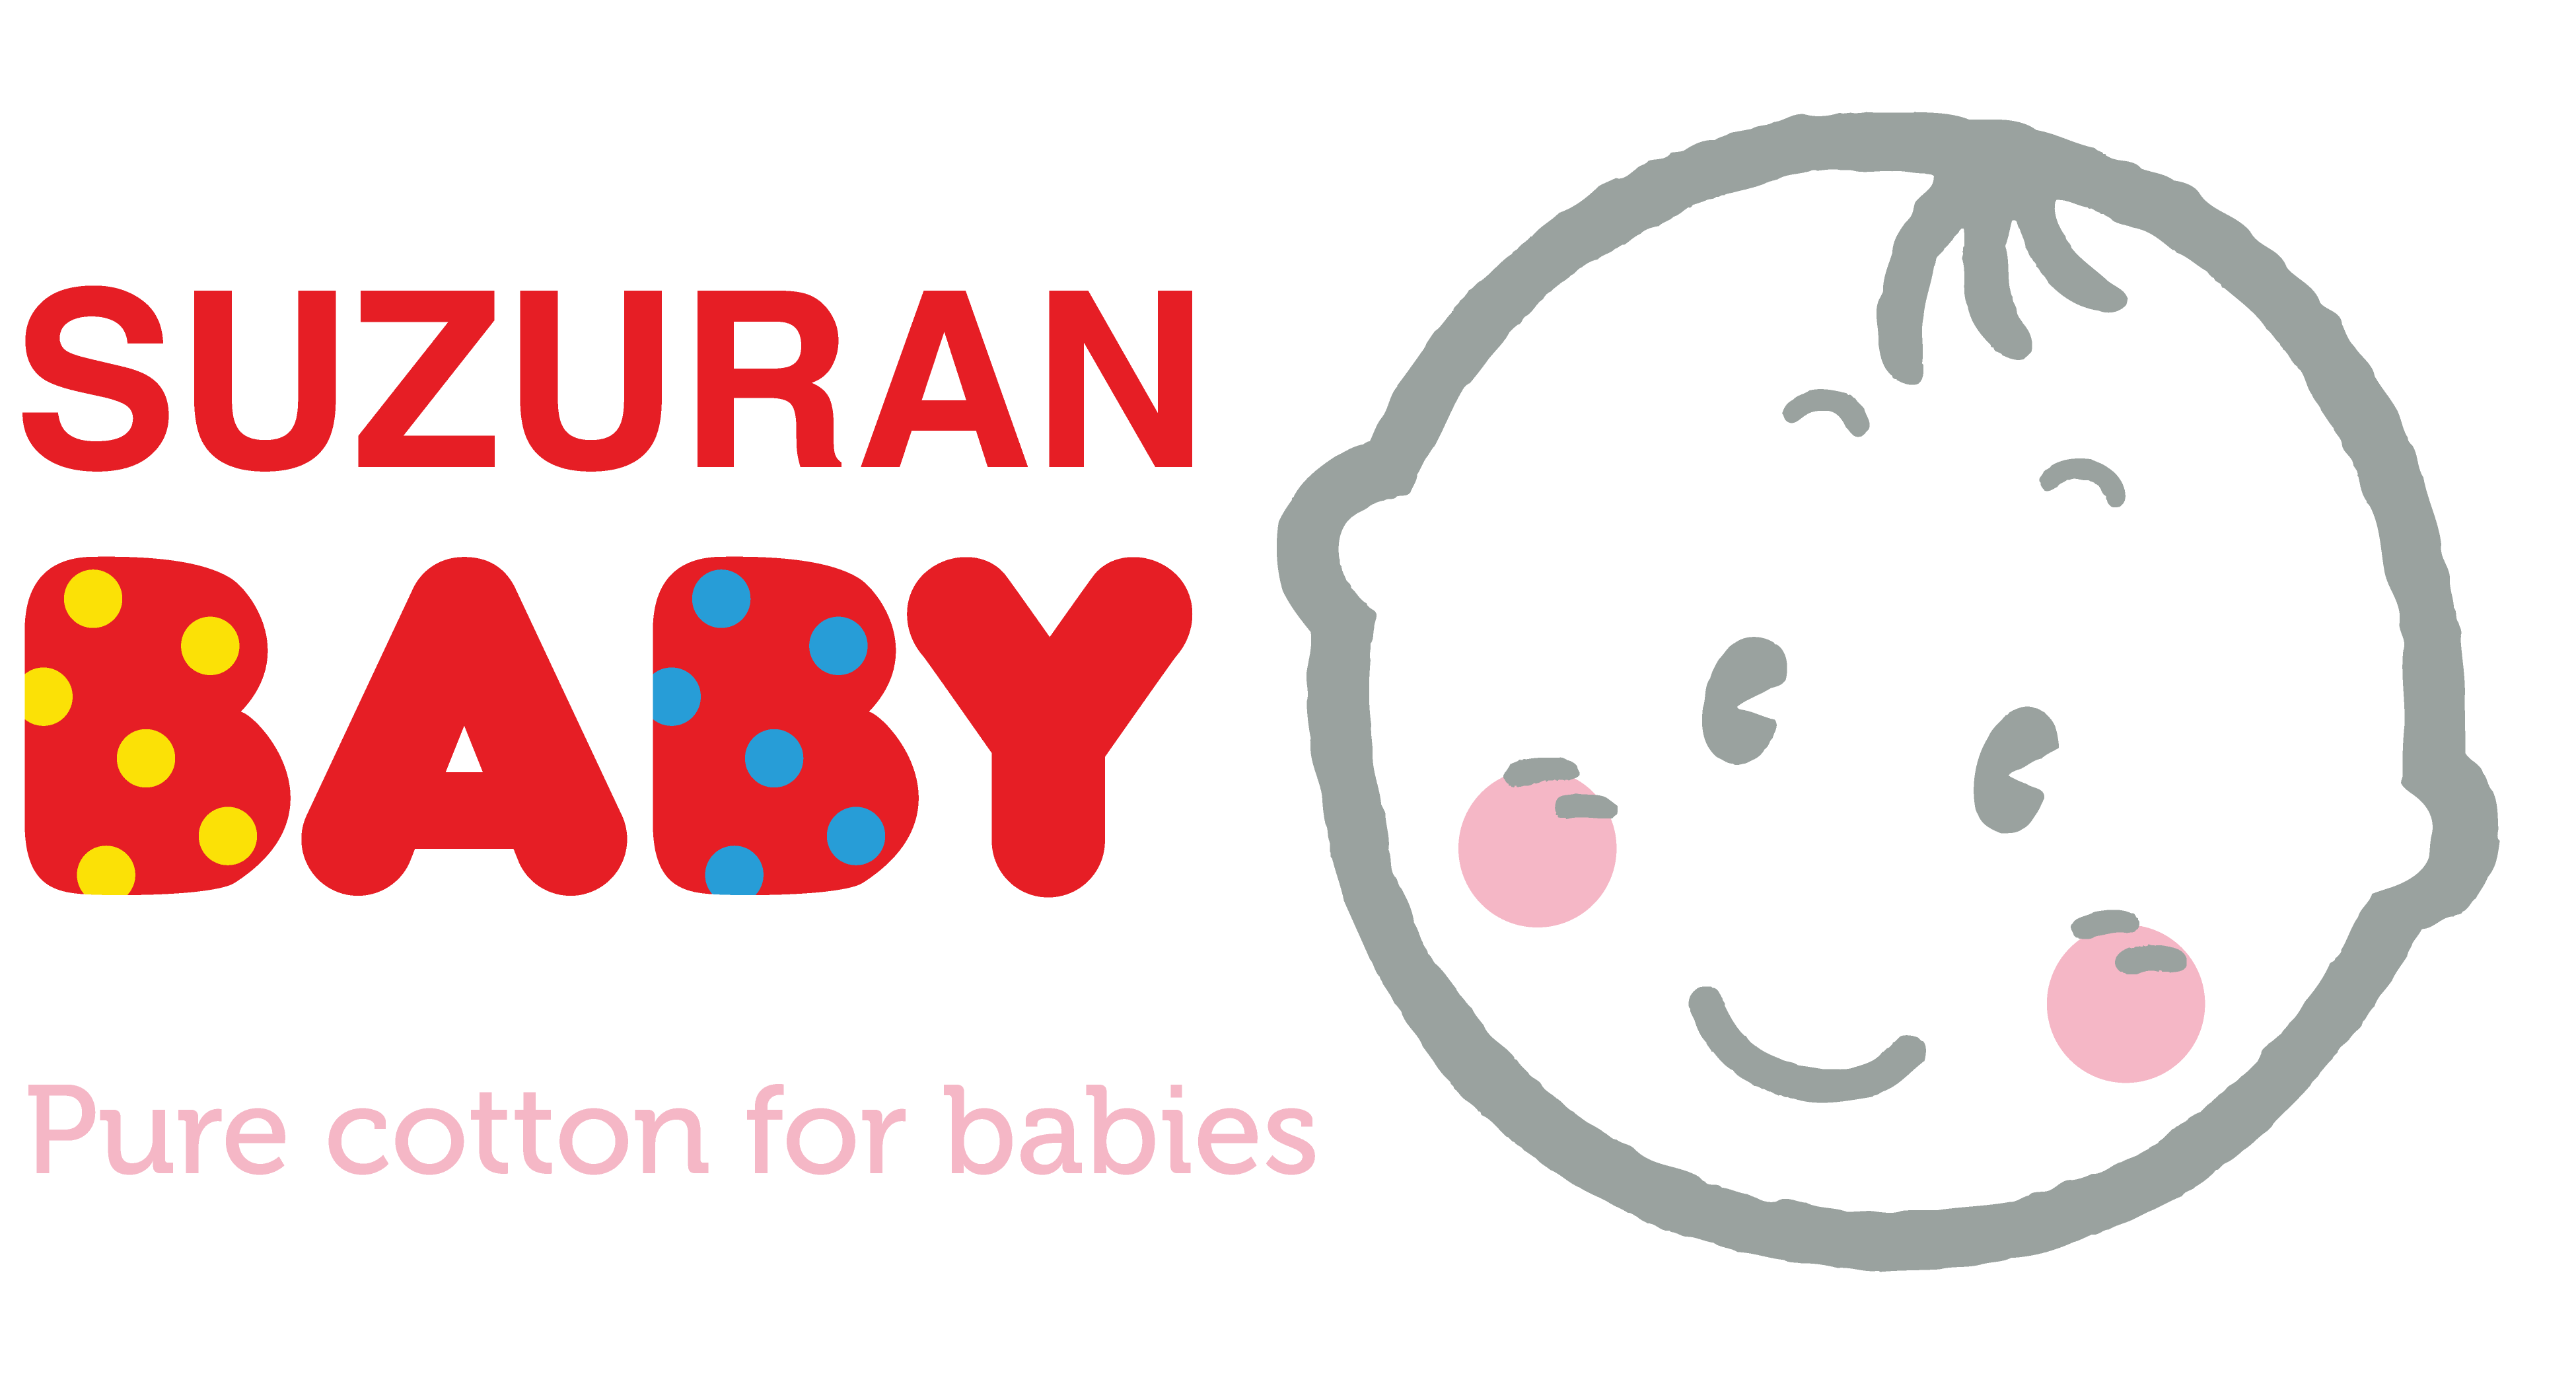 Suzuran Baby - Pure Cotton for Babies